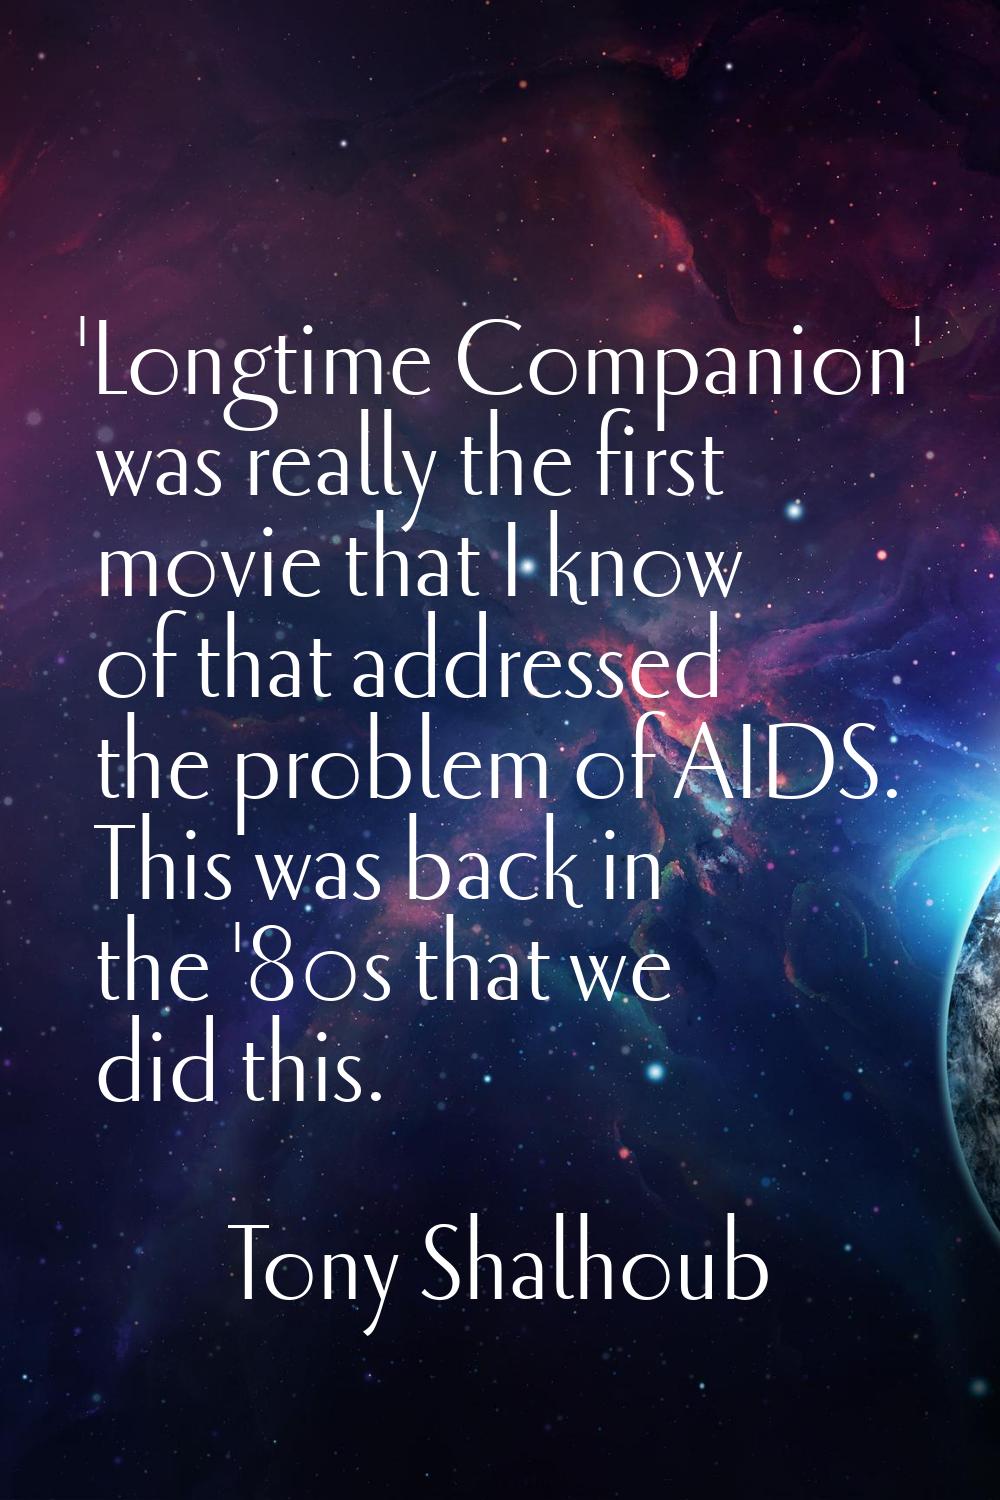 'Longtime Companion' was really the first movie that I know of that addressed the problem of AIDS. 